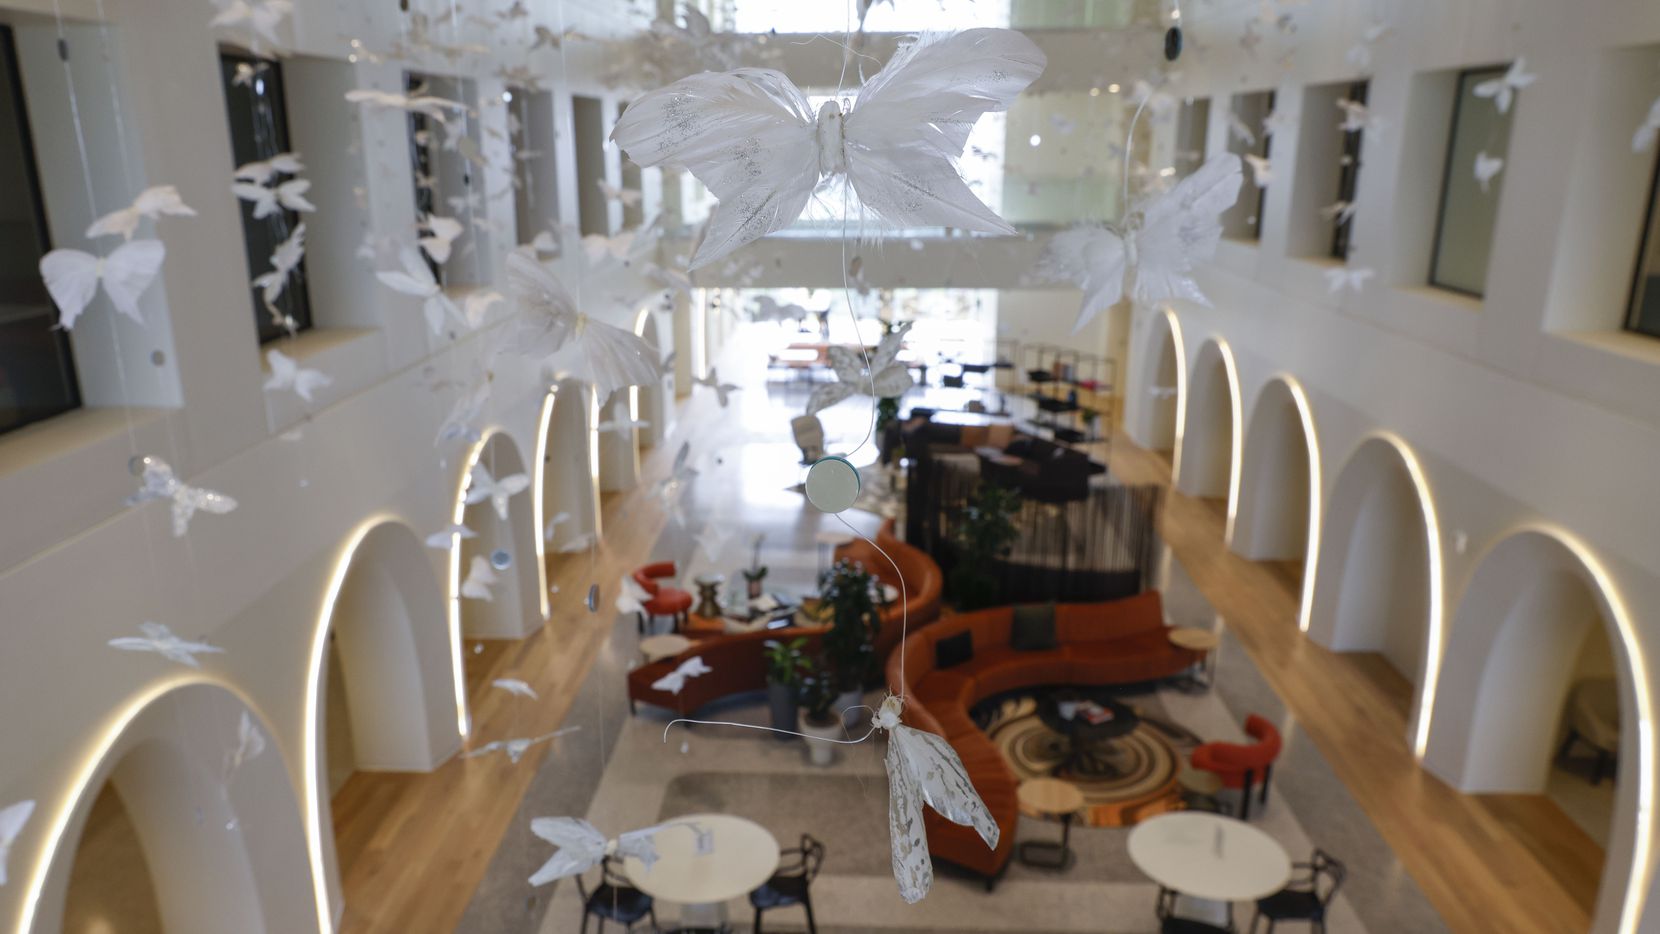 The retailer's signature butterflies hang from the ceiling in the atrium of the Neiman...